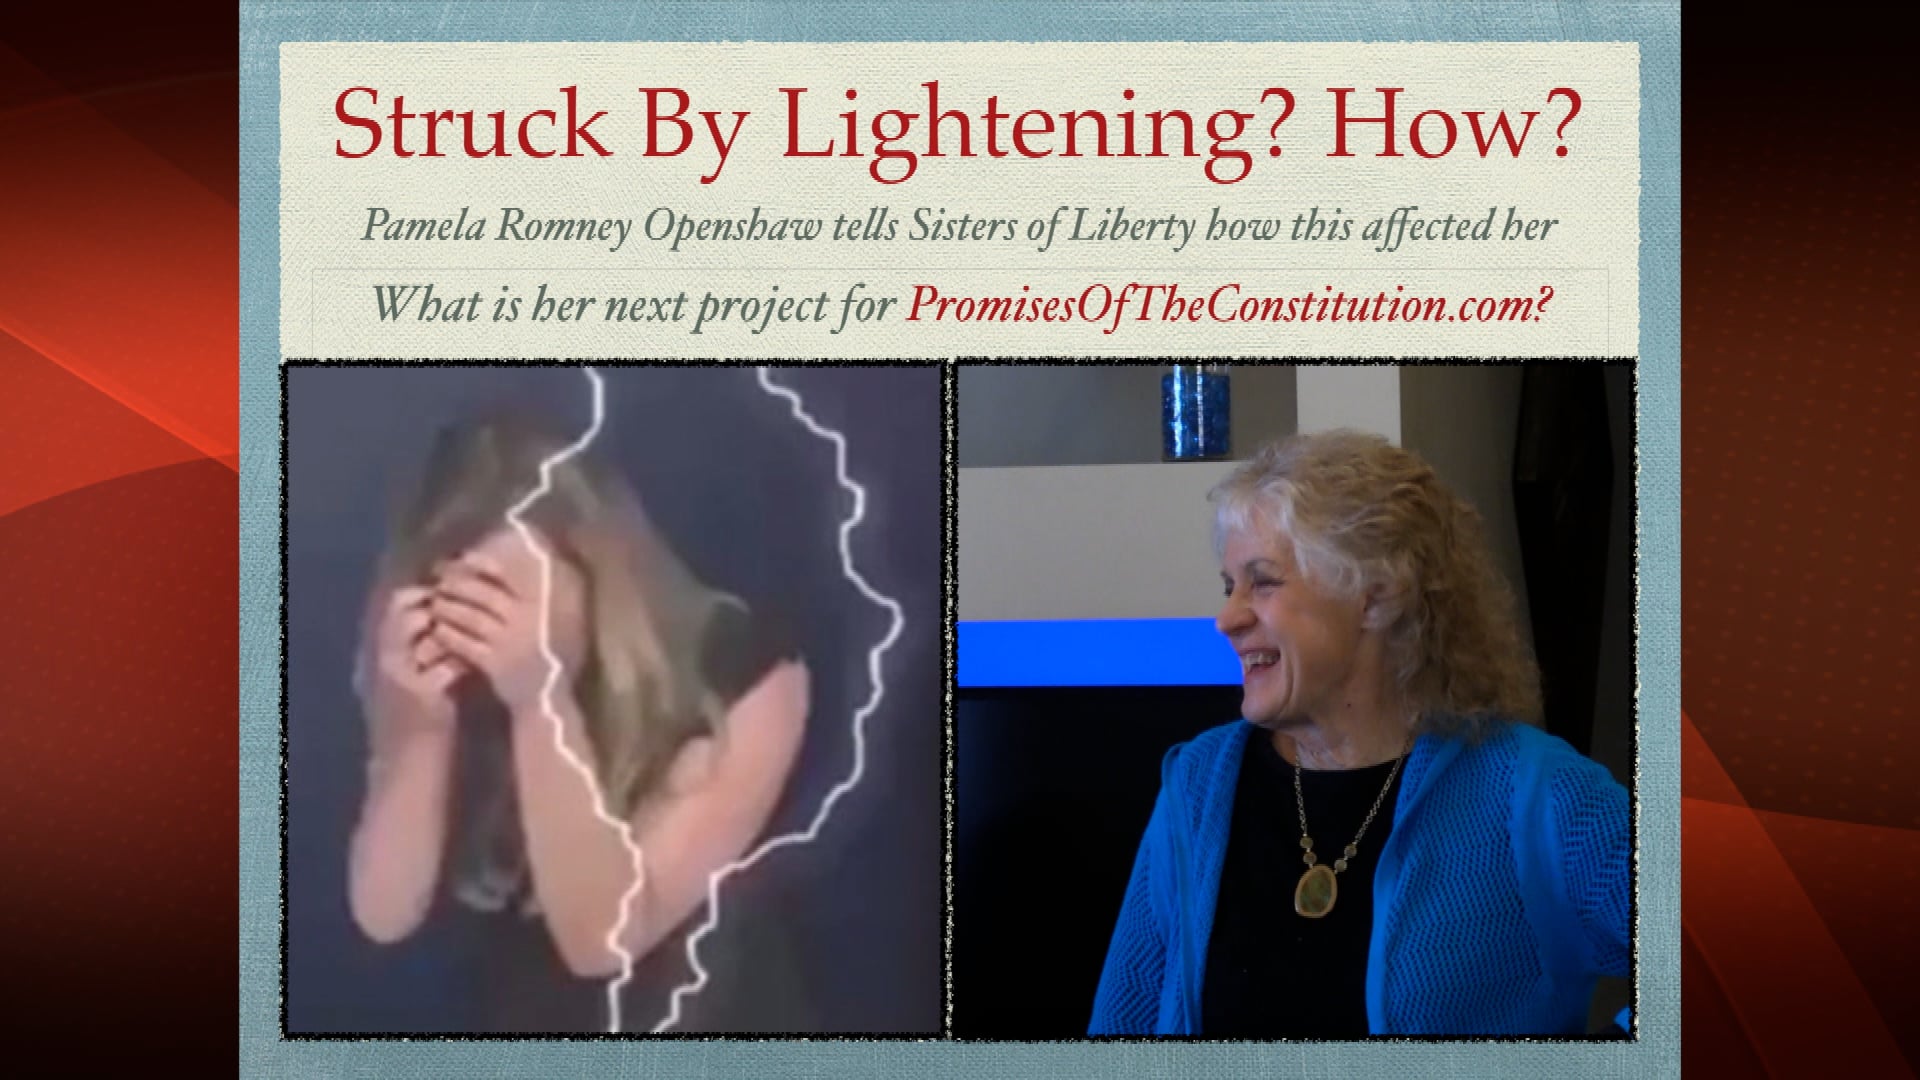 Pamela Romney Openshaw - Struck by Lightening? How it affected me - Sisters of Liberty